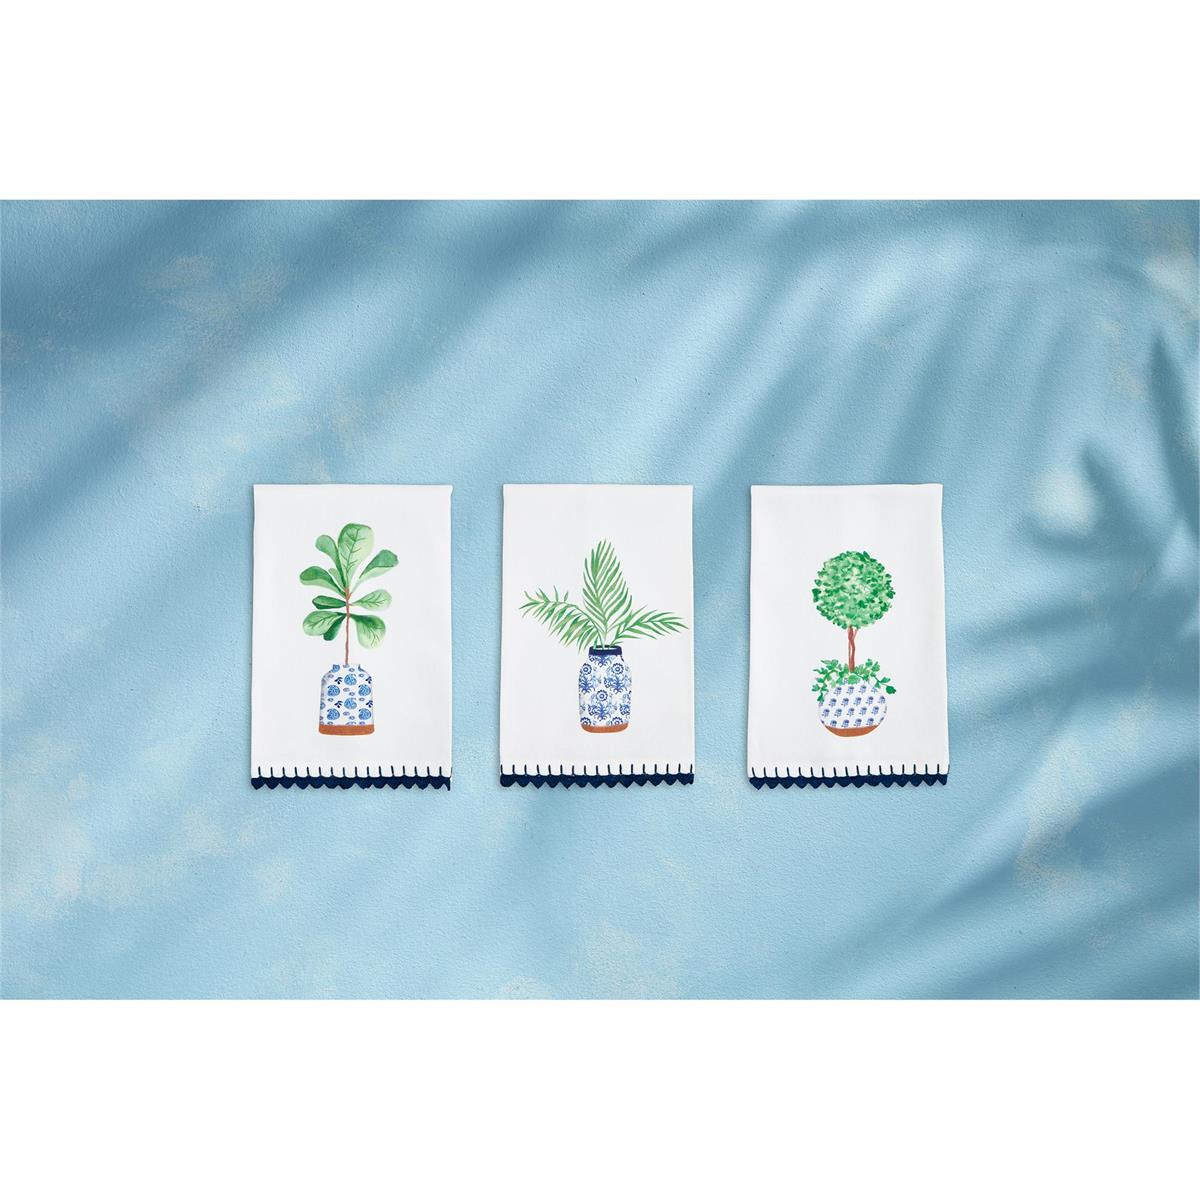 3 styles of potted plant hand towels in a row on a blue background.